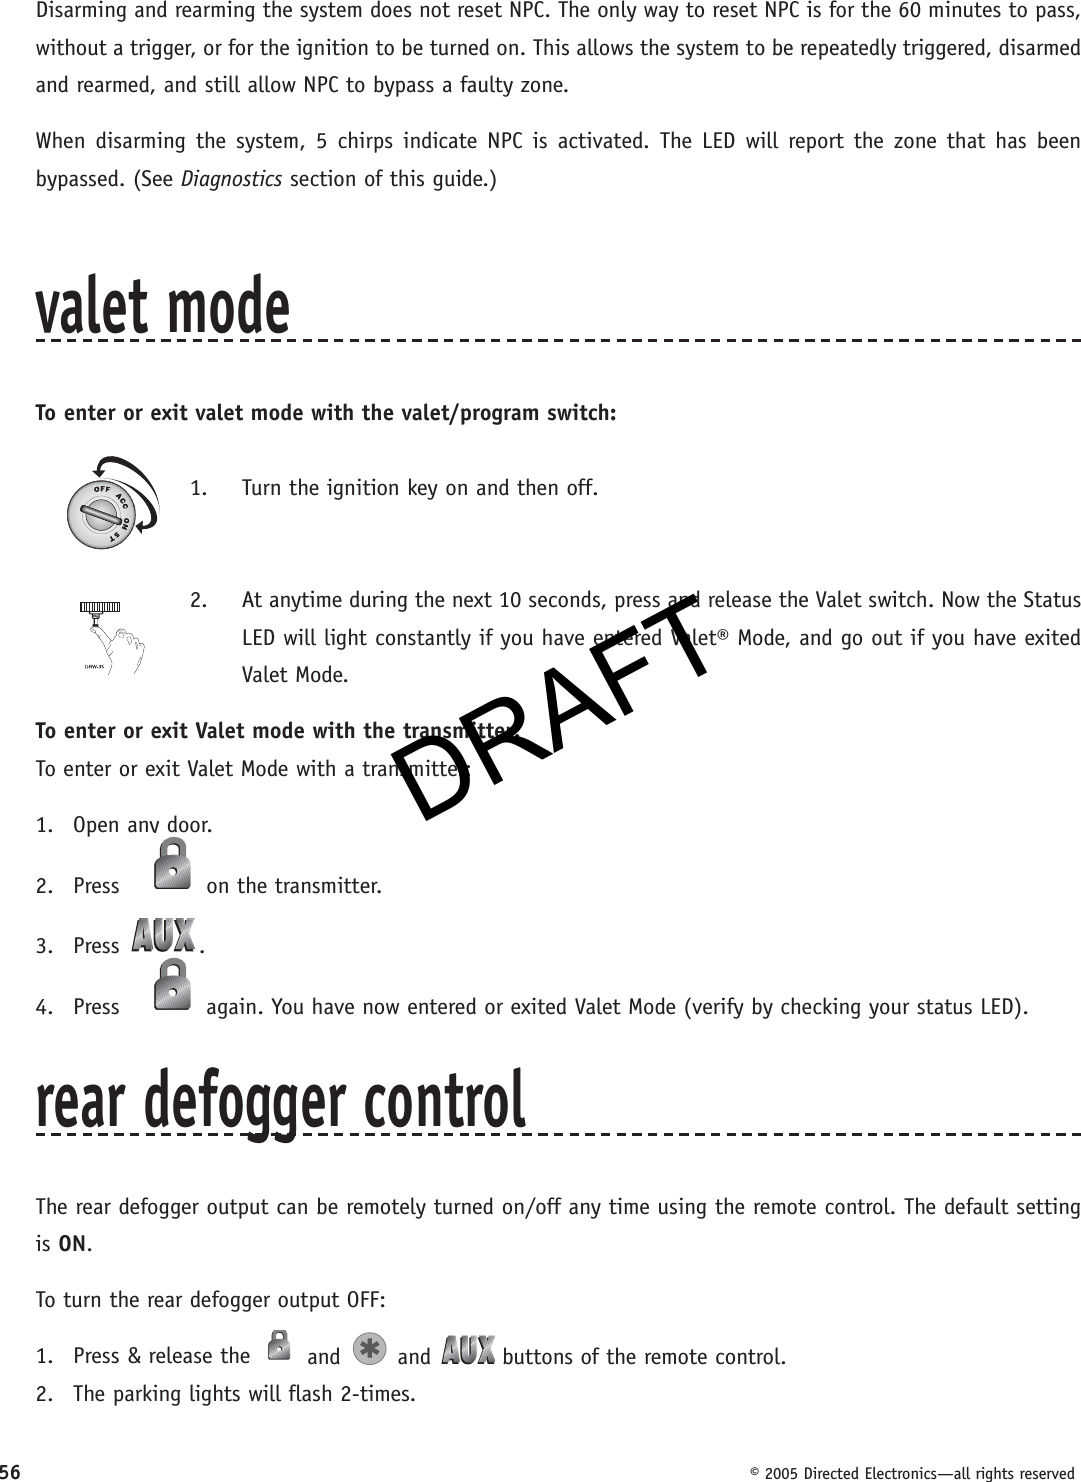 DRAFT56  © 2005 Directed Electronics—all rights reservedDisarming and rearming the system does not reset NPC. The only way to reset NPC is for the 60 minutes to pass, without a trigger, or for the ignition to be turned on. This allows the system to be repeatedly triggered, disarmed and rearmed, and still allow NPC to bypass a faulty zone.When disarming the system, 5 chirps indicate NPC is activated. The LED will report the zone that has been bypassed. (See Diagnostics section of this guide.)valet modeTo enter or exit valet mode with the valet/program switch:1.  Turn the ignition key on and then off.2.  At anytime during the next 10 seconds, press and release the Valet switch. Now the Status LED will light constantly if you have entered Valet® Mode, and go out if you have exited Valet Mode.To enter or exit Valet mode with the transmitter:To enter or exit Valet Mode with a transmitter:1. Open any door.2. Press   on the transmitter.3. Press  .4. Press   again. You have now entered or exited Valet Mode (verify by checking your status LED).rear defogger controlThe rear defogger output can be remotely turned on/off any time using the remote control. The default setting is ON.To turn the rear defogger output OFF:1.  Press &amp; release the   and   and   buttons of the remote control.2.  The parking lights will flash 2-times.DRAFT